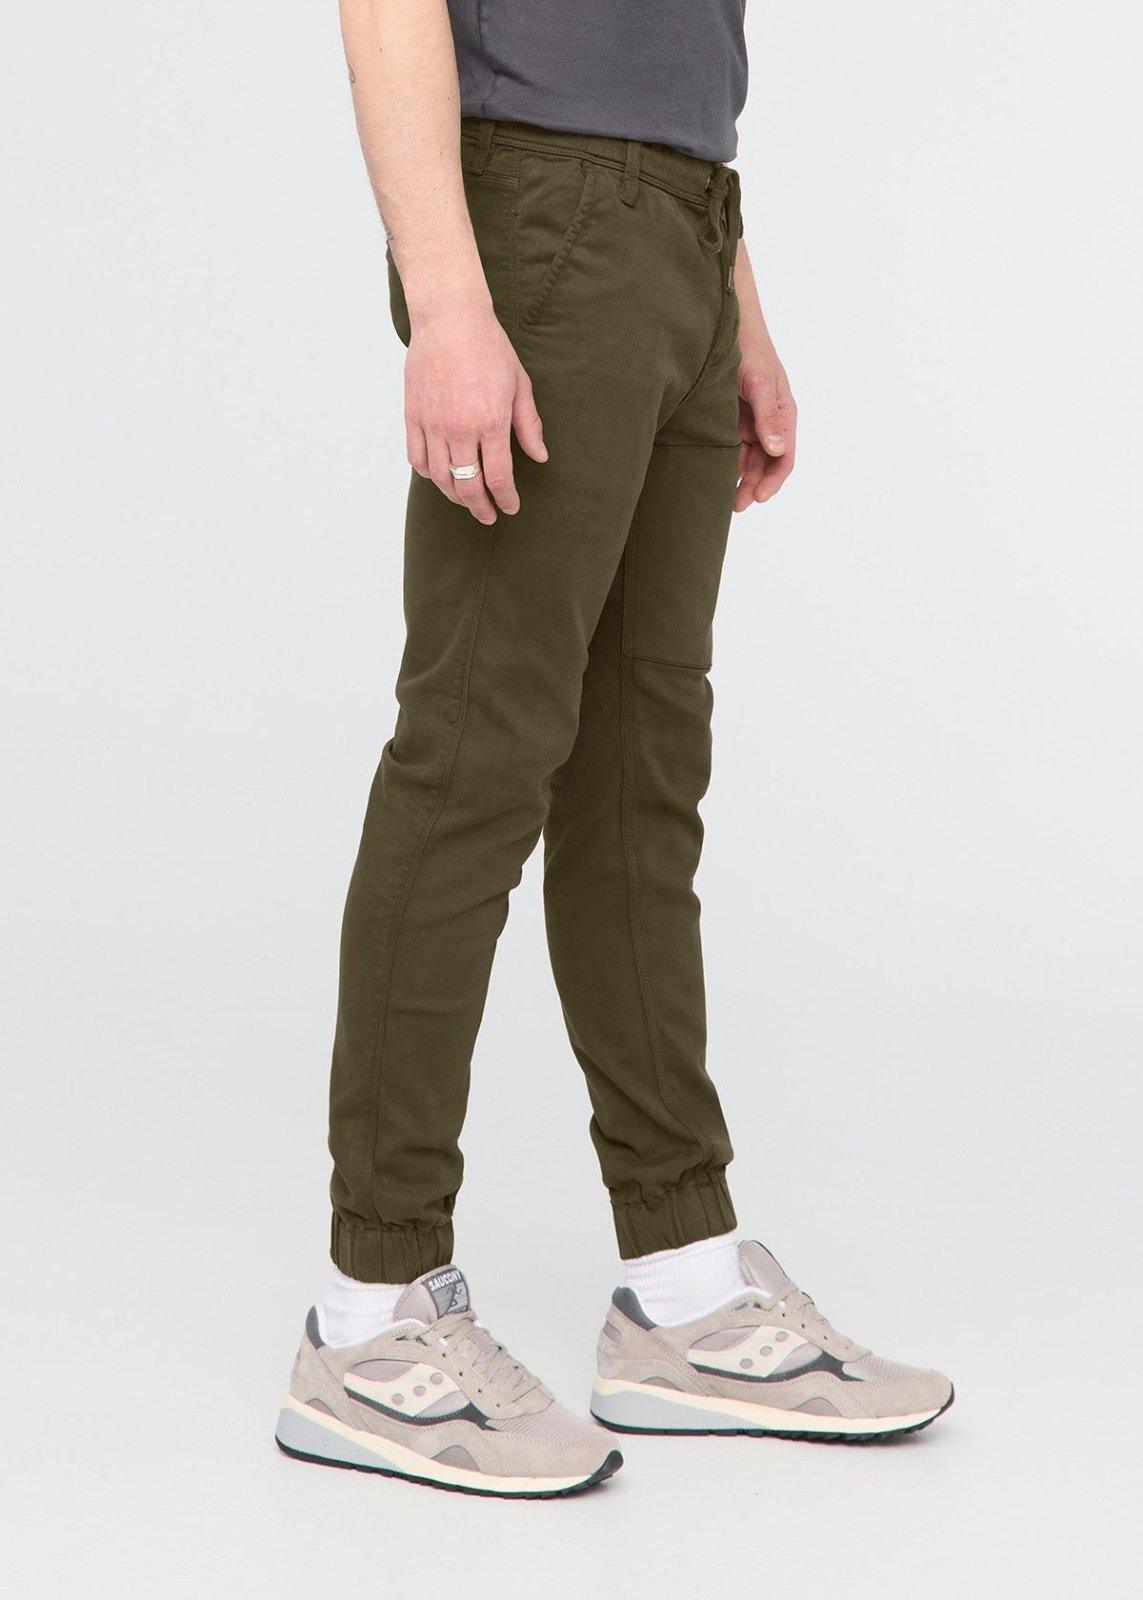 mens army green athletic jogger side